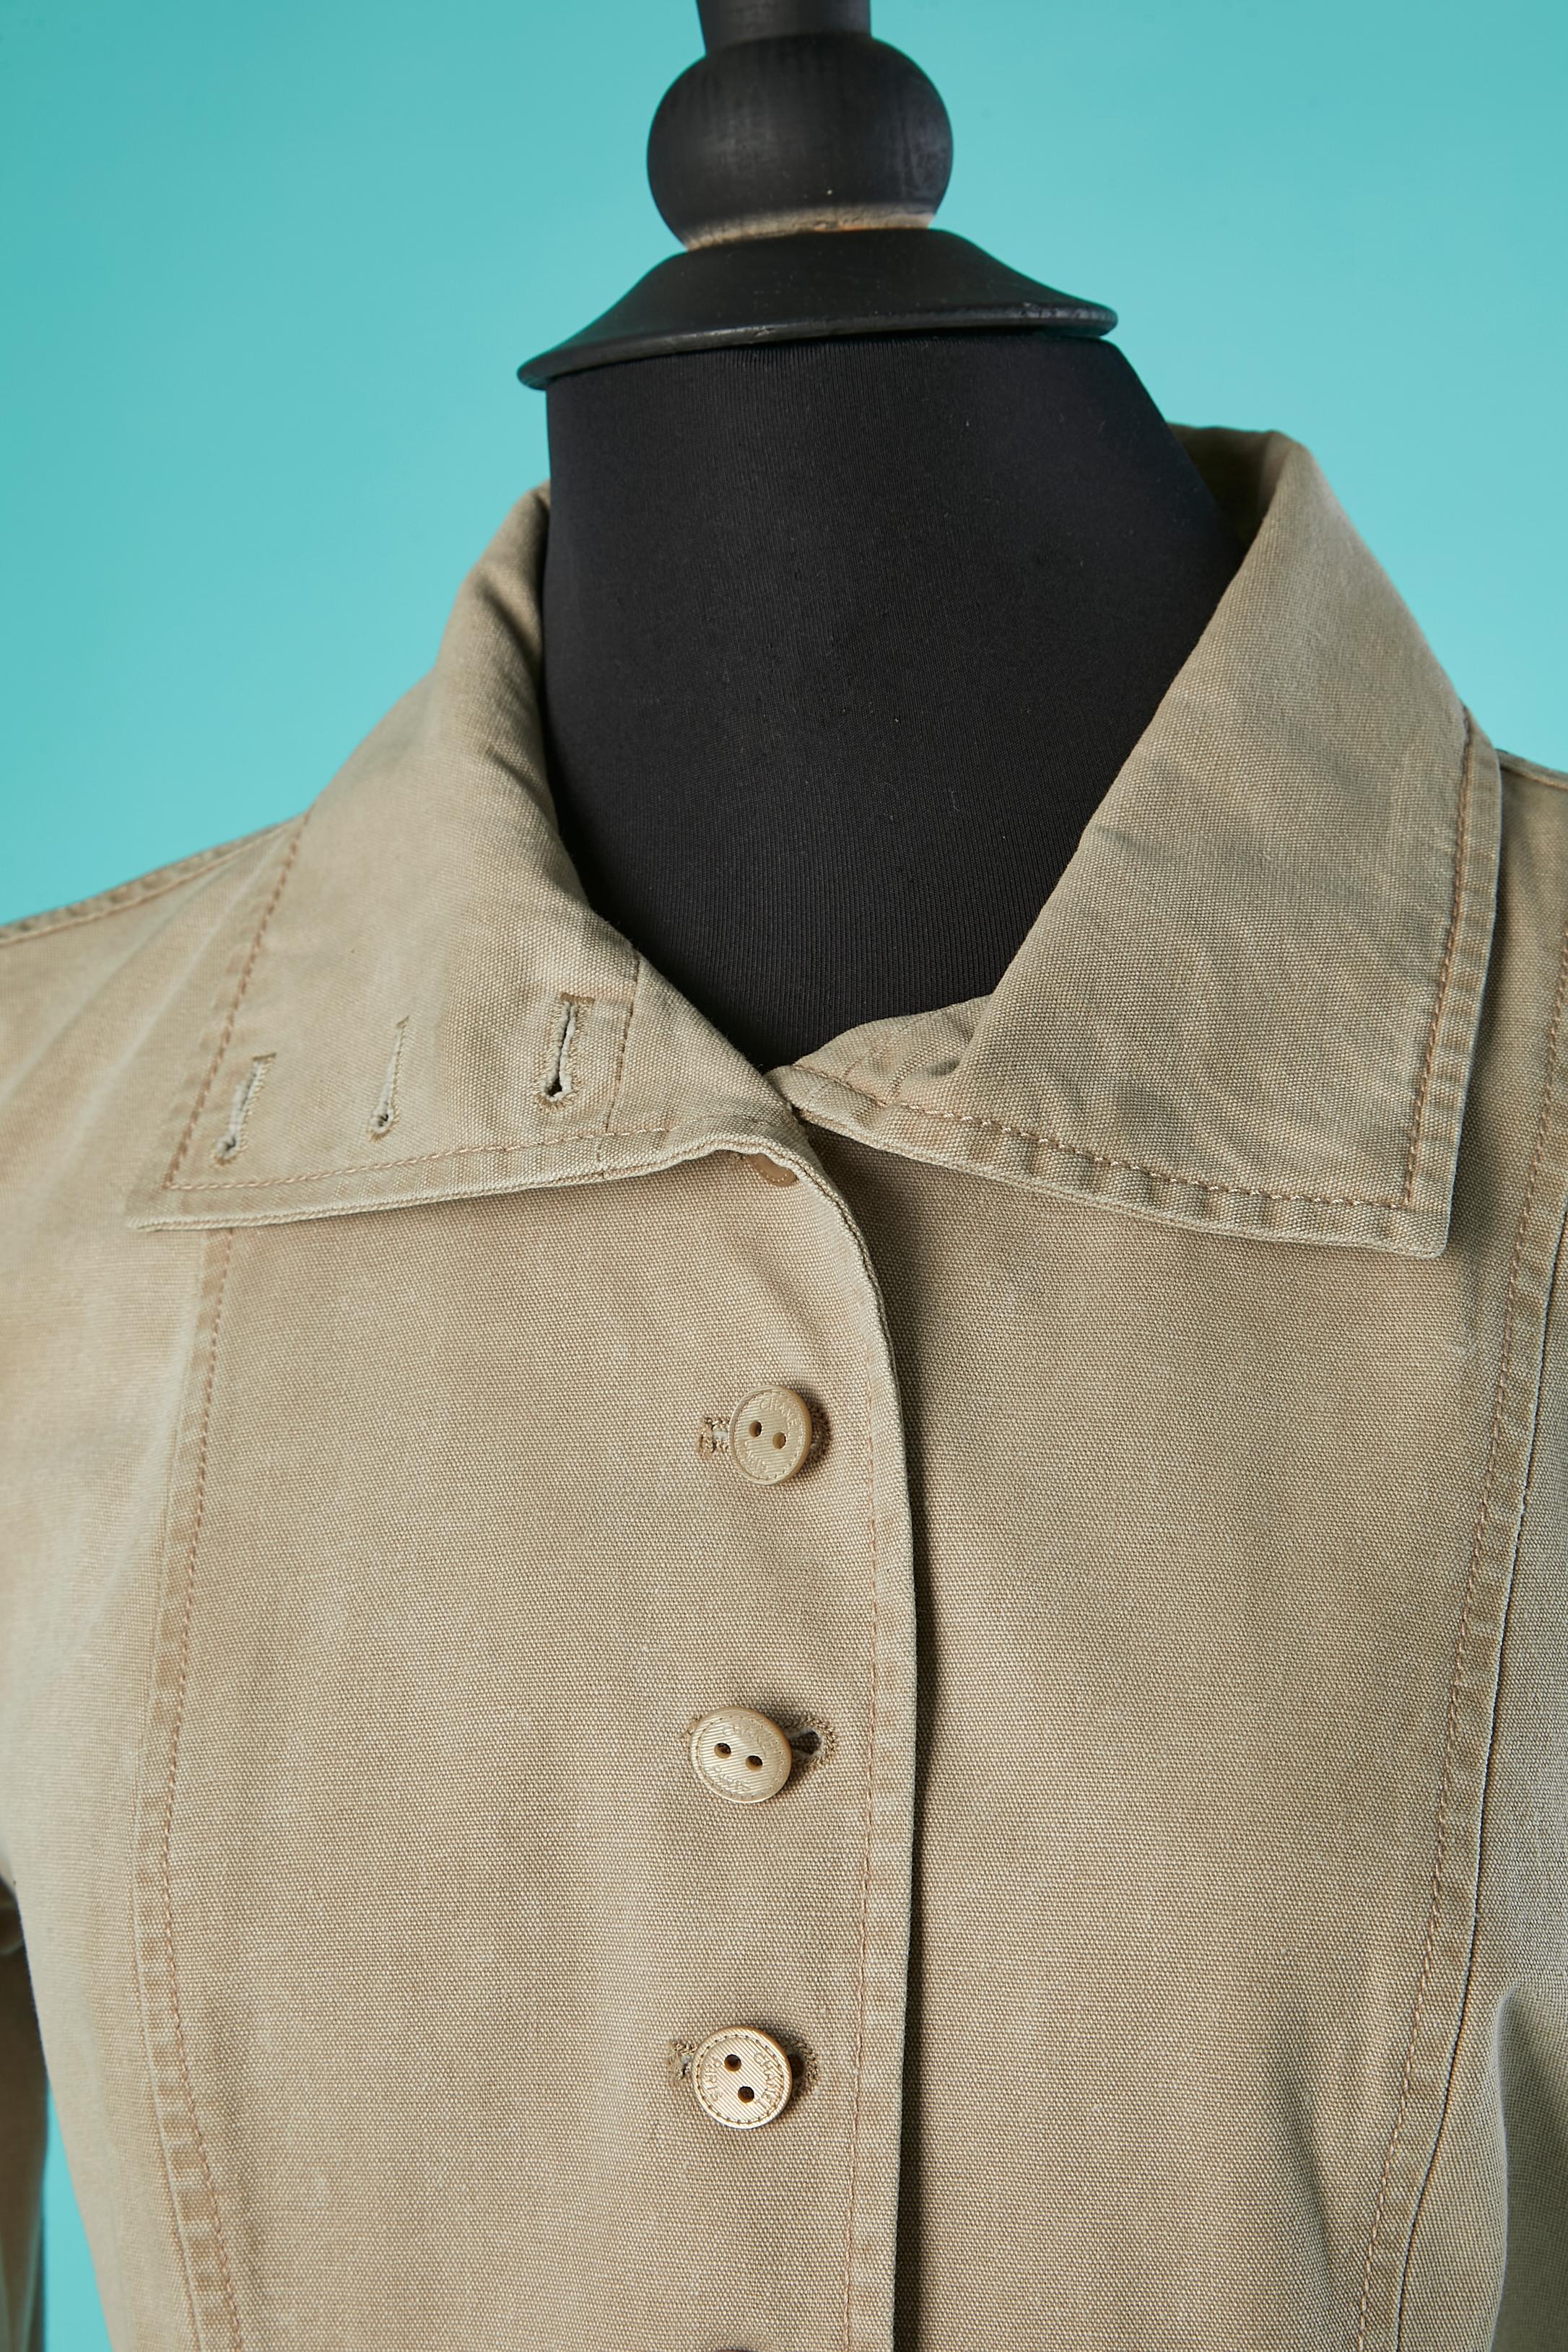 Beige cotton jacket with branded buttons in the middle front and cuffs.
Fabric composition: 96% cotton, 4% stretch.
 Same fabric lining inside the shoulders and piping.
SIZE 38 / M 